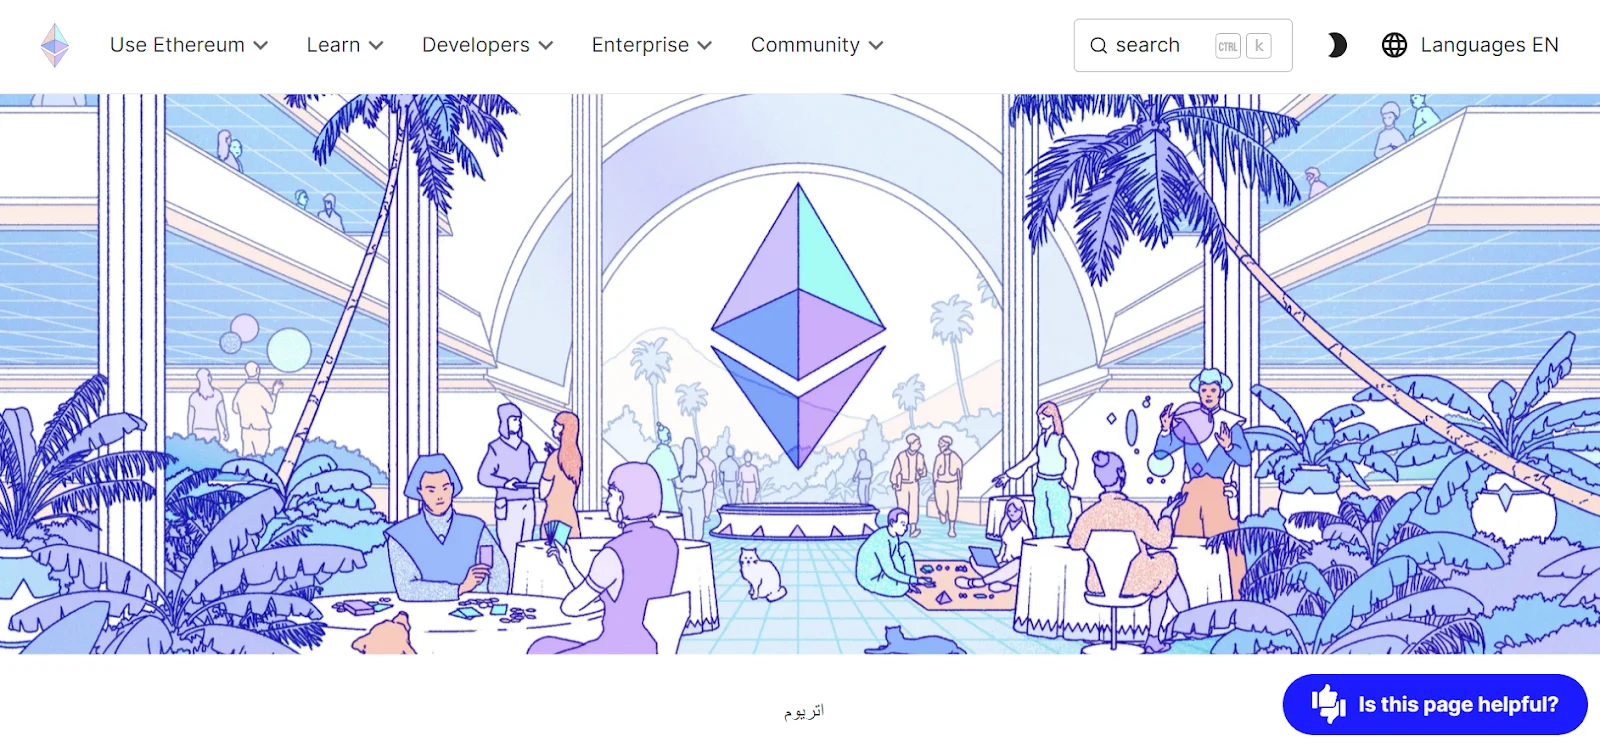 Landing page of the Ethereum blockchain